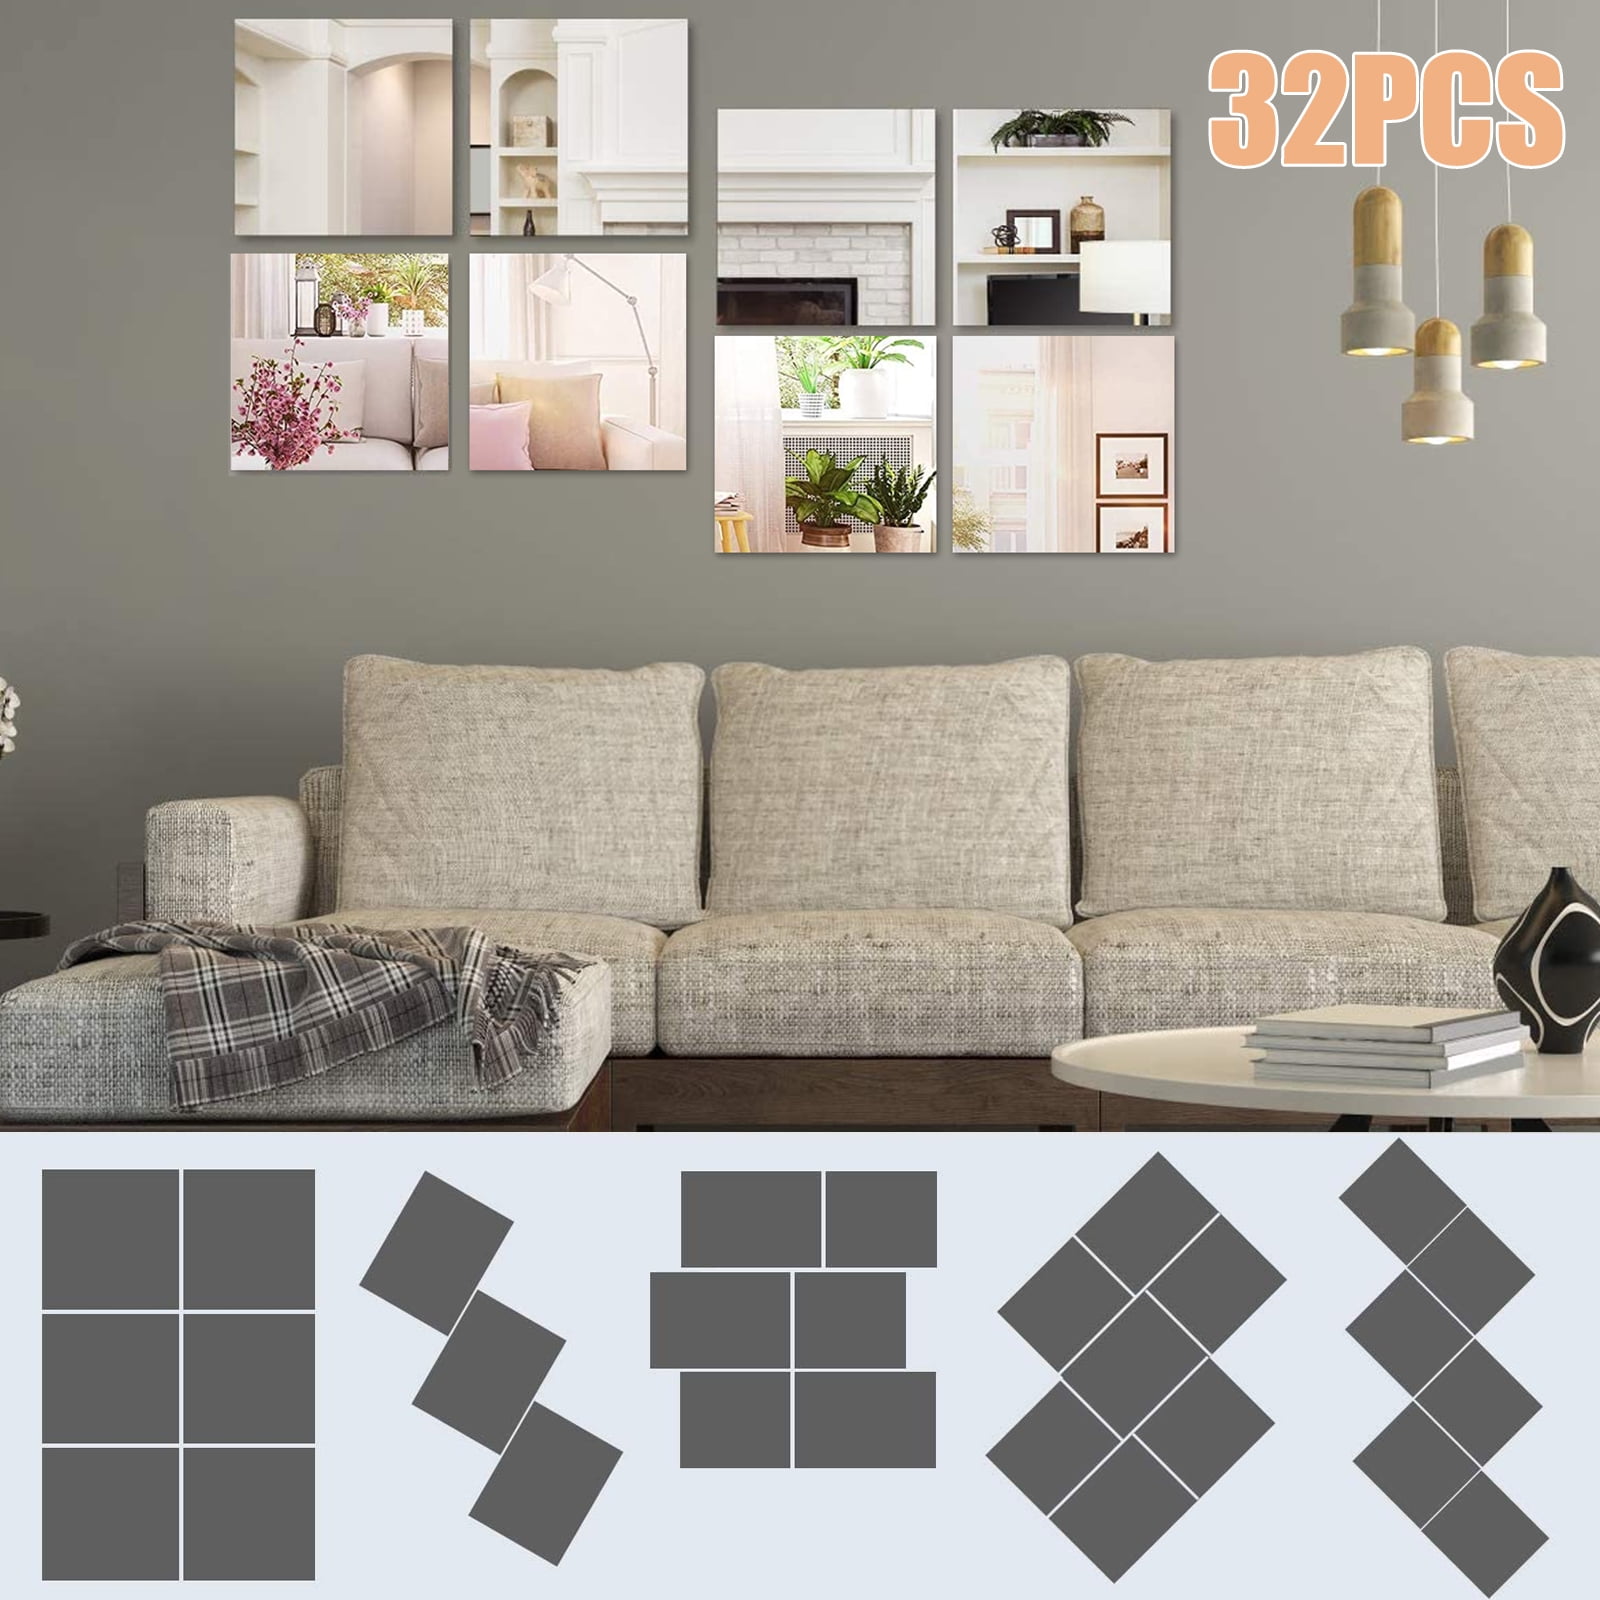 Quality Adhesive Mirror Sheet 6 x 9 Inches Flexible Mirrors Sheets, Non- Glass Self Adhesive Stick on Mirror Tiles, Cut Mirror Stickers to Size,  Peel and Stick, Great for Crafts and Mirror Wall